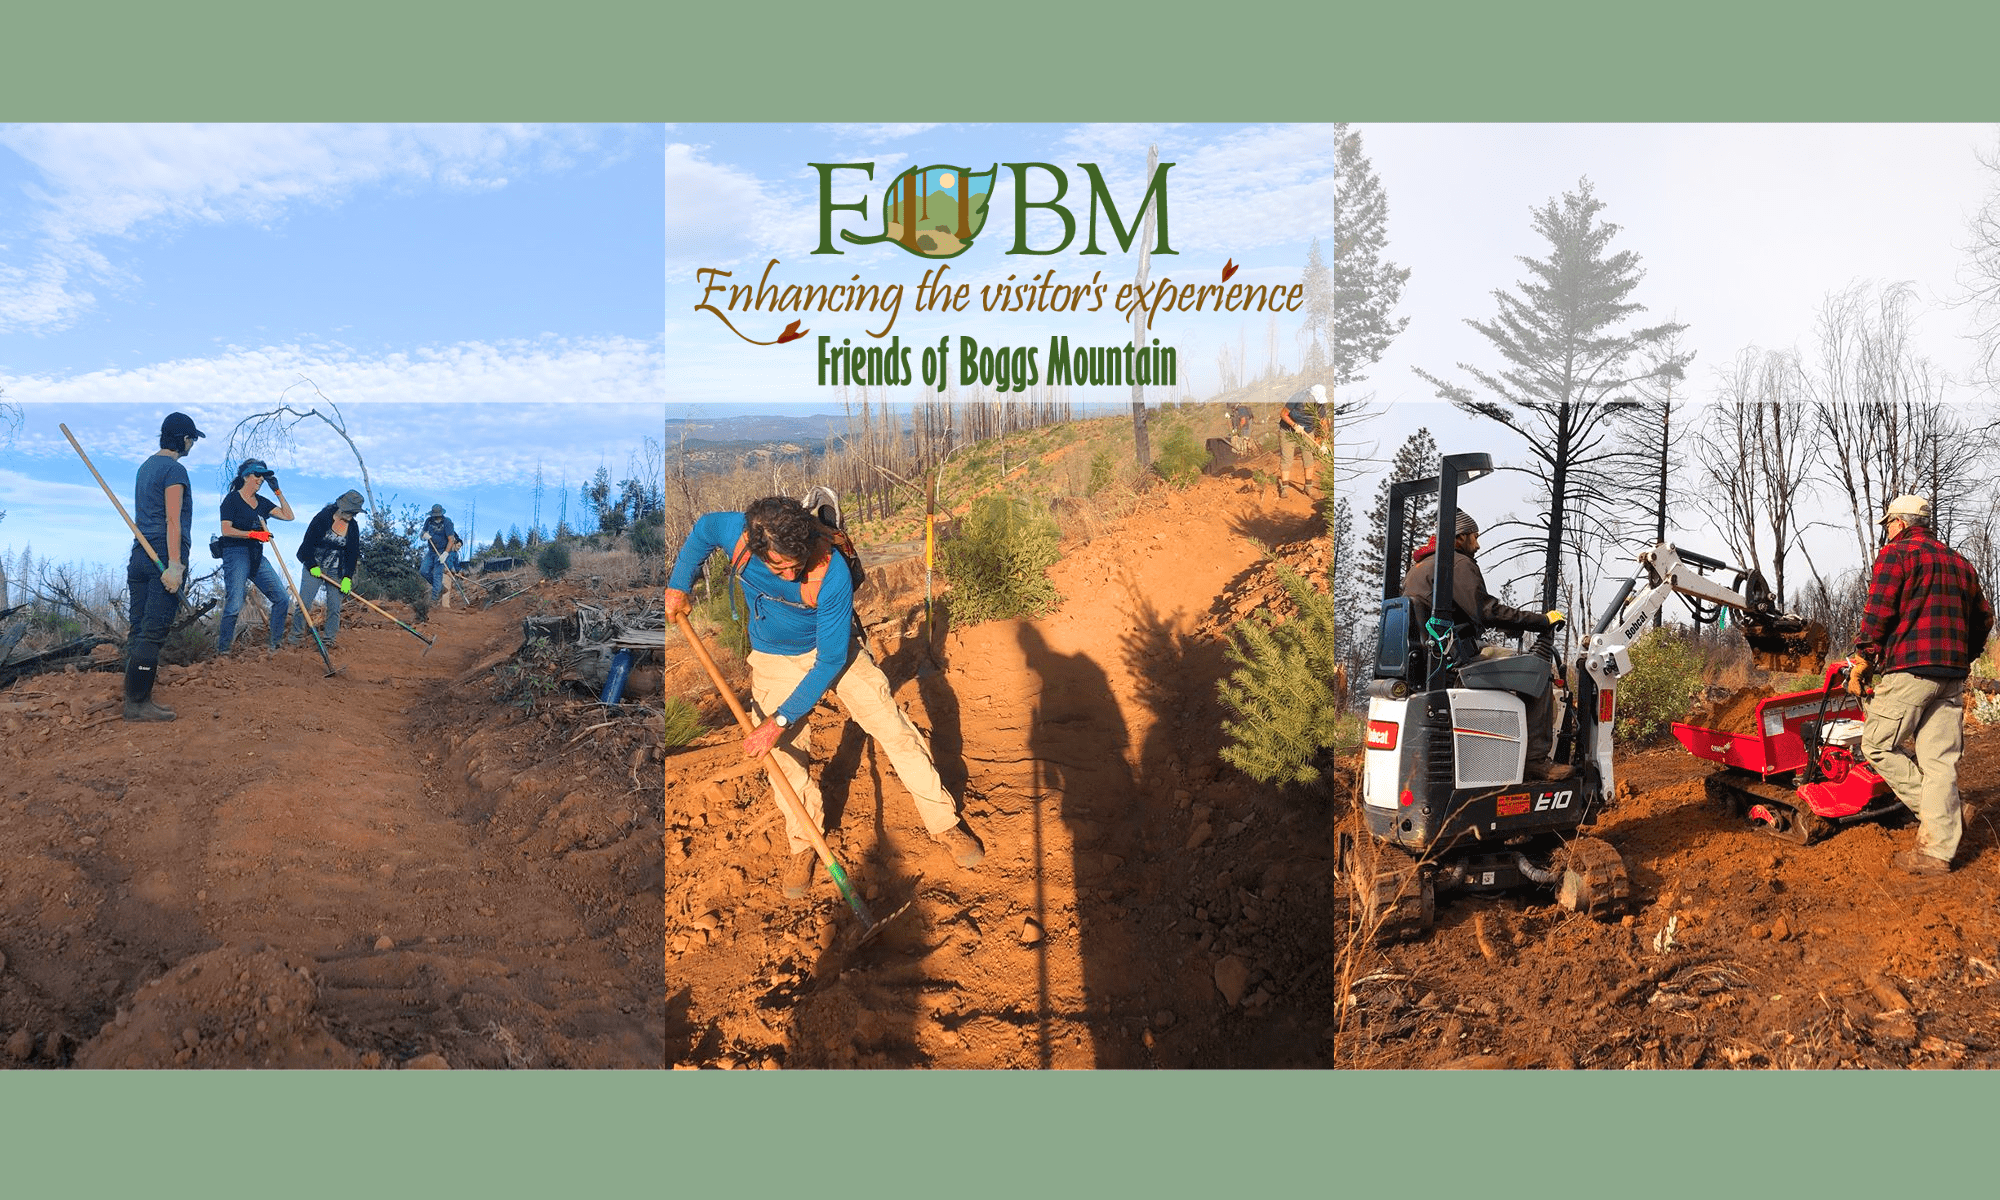 Images of trail builders at Boggs Mountain Demonstration State Forest